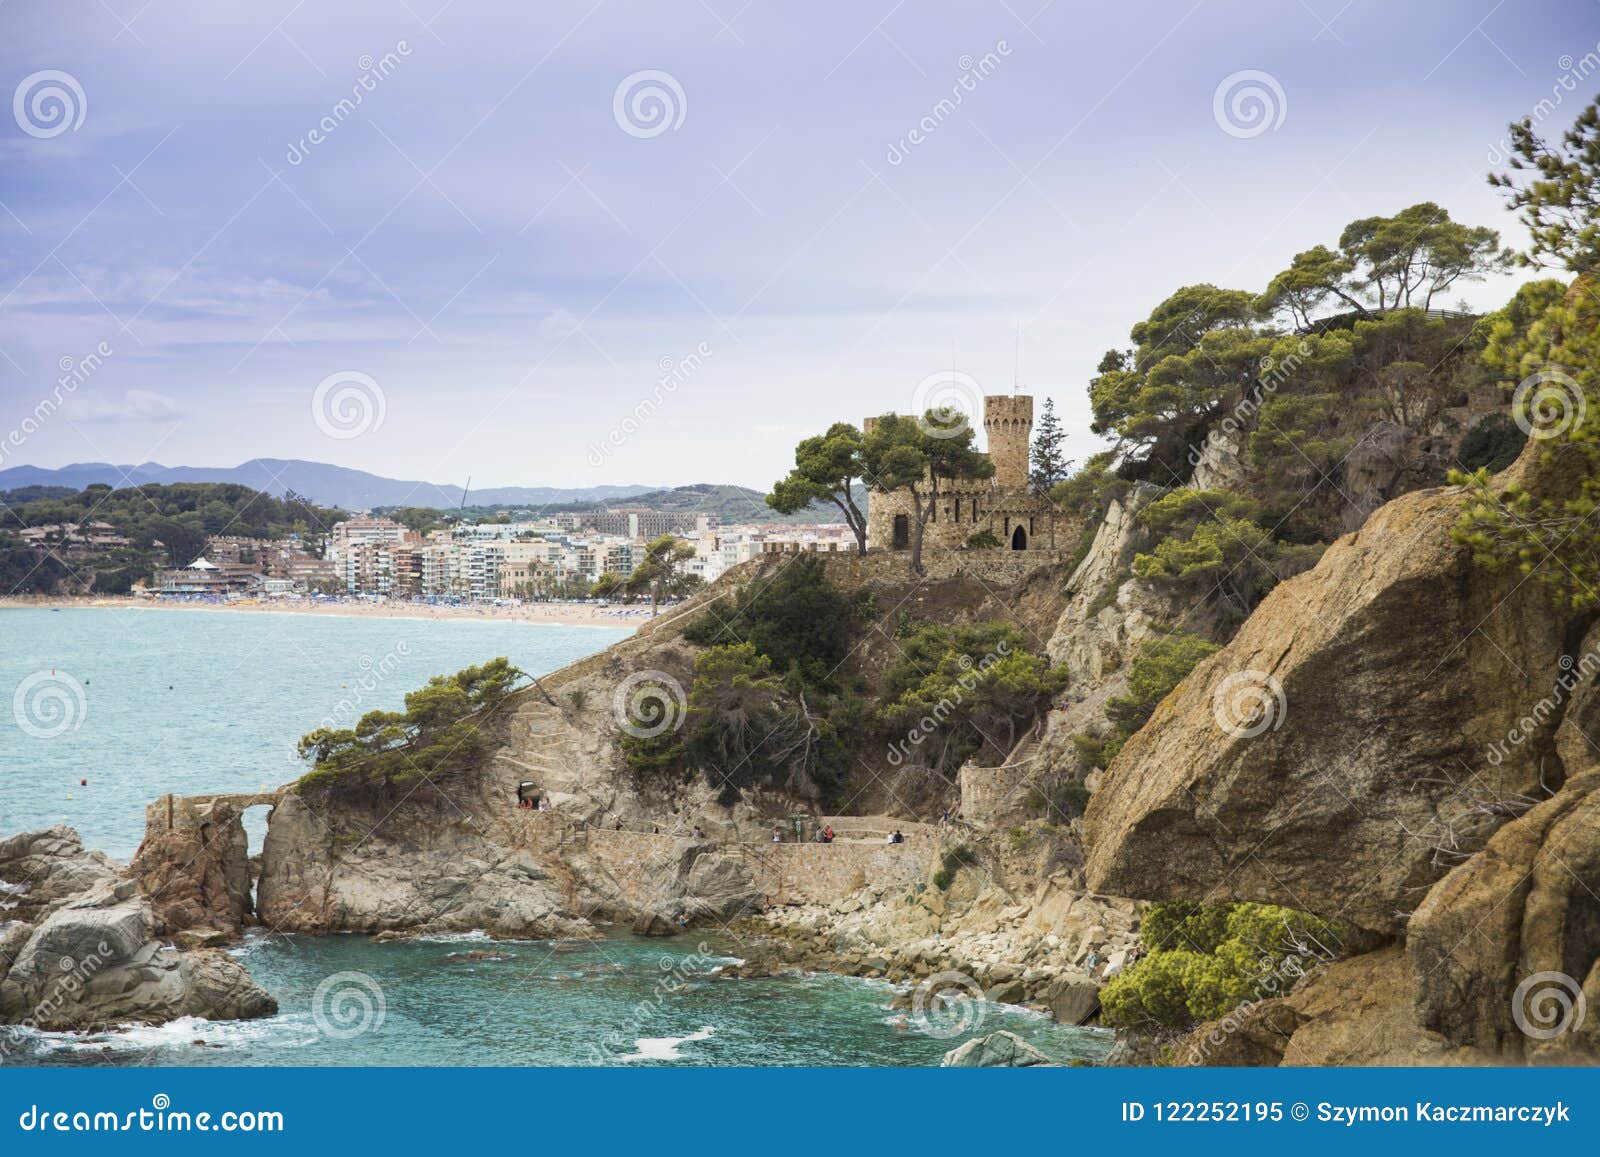 plajan on the costa brava and city beach in lloret de mar, spain. sand and sea waves.